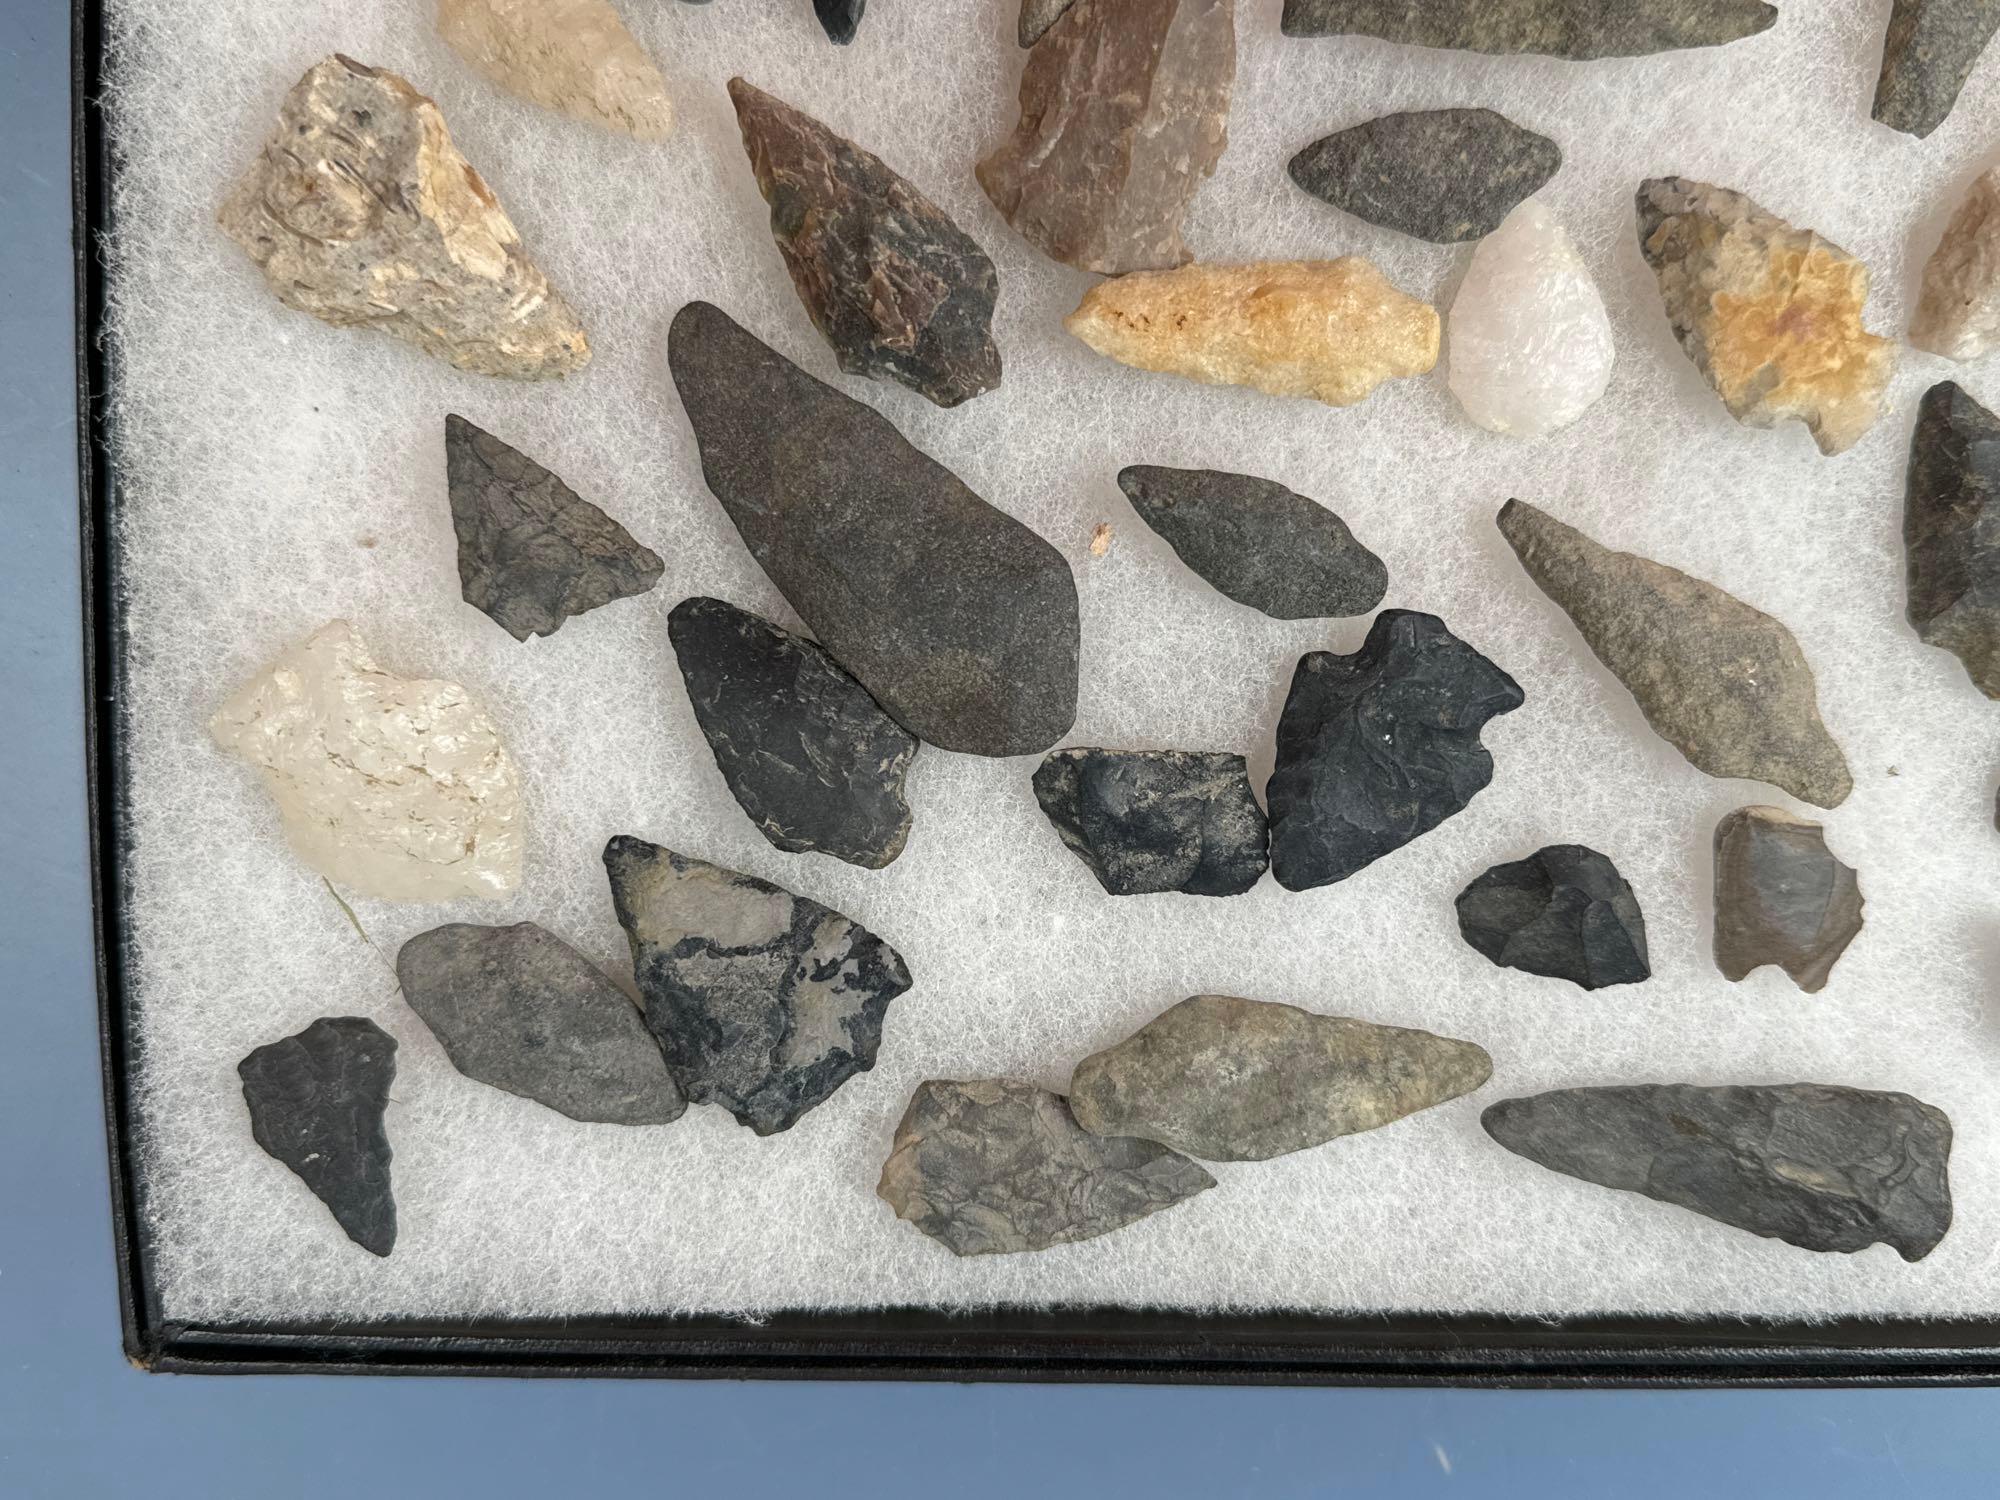 Lot of Various Arrowheads, Points, Longest is 2 3/8", Found in Southern New Jersey